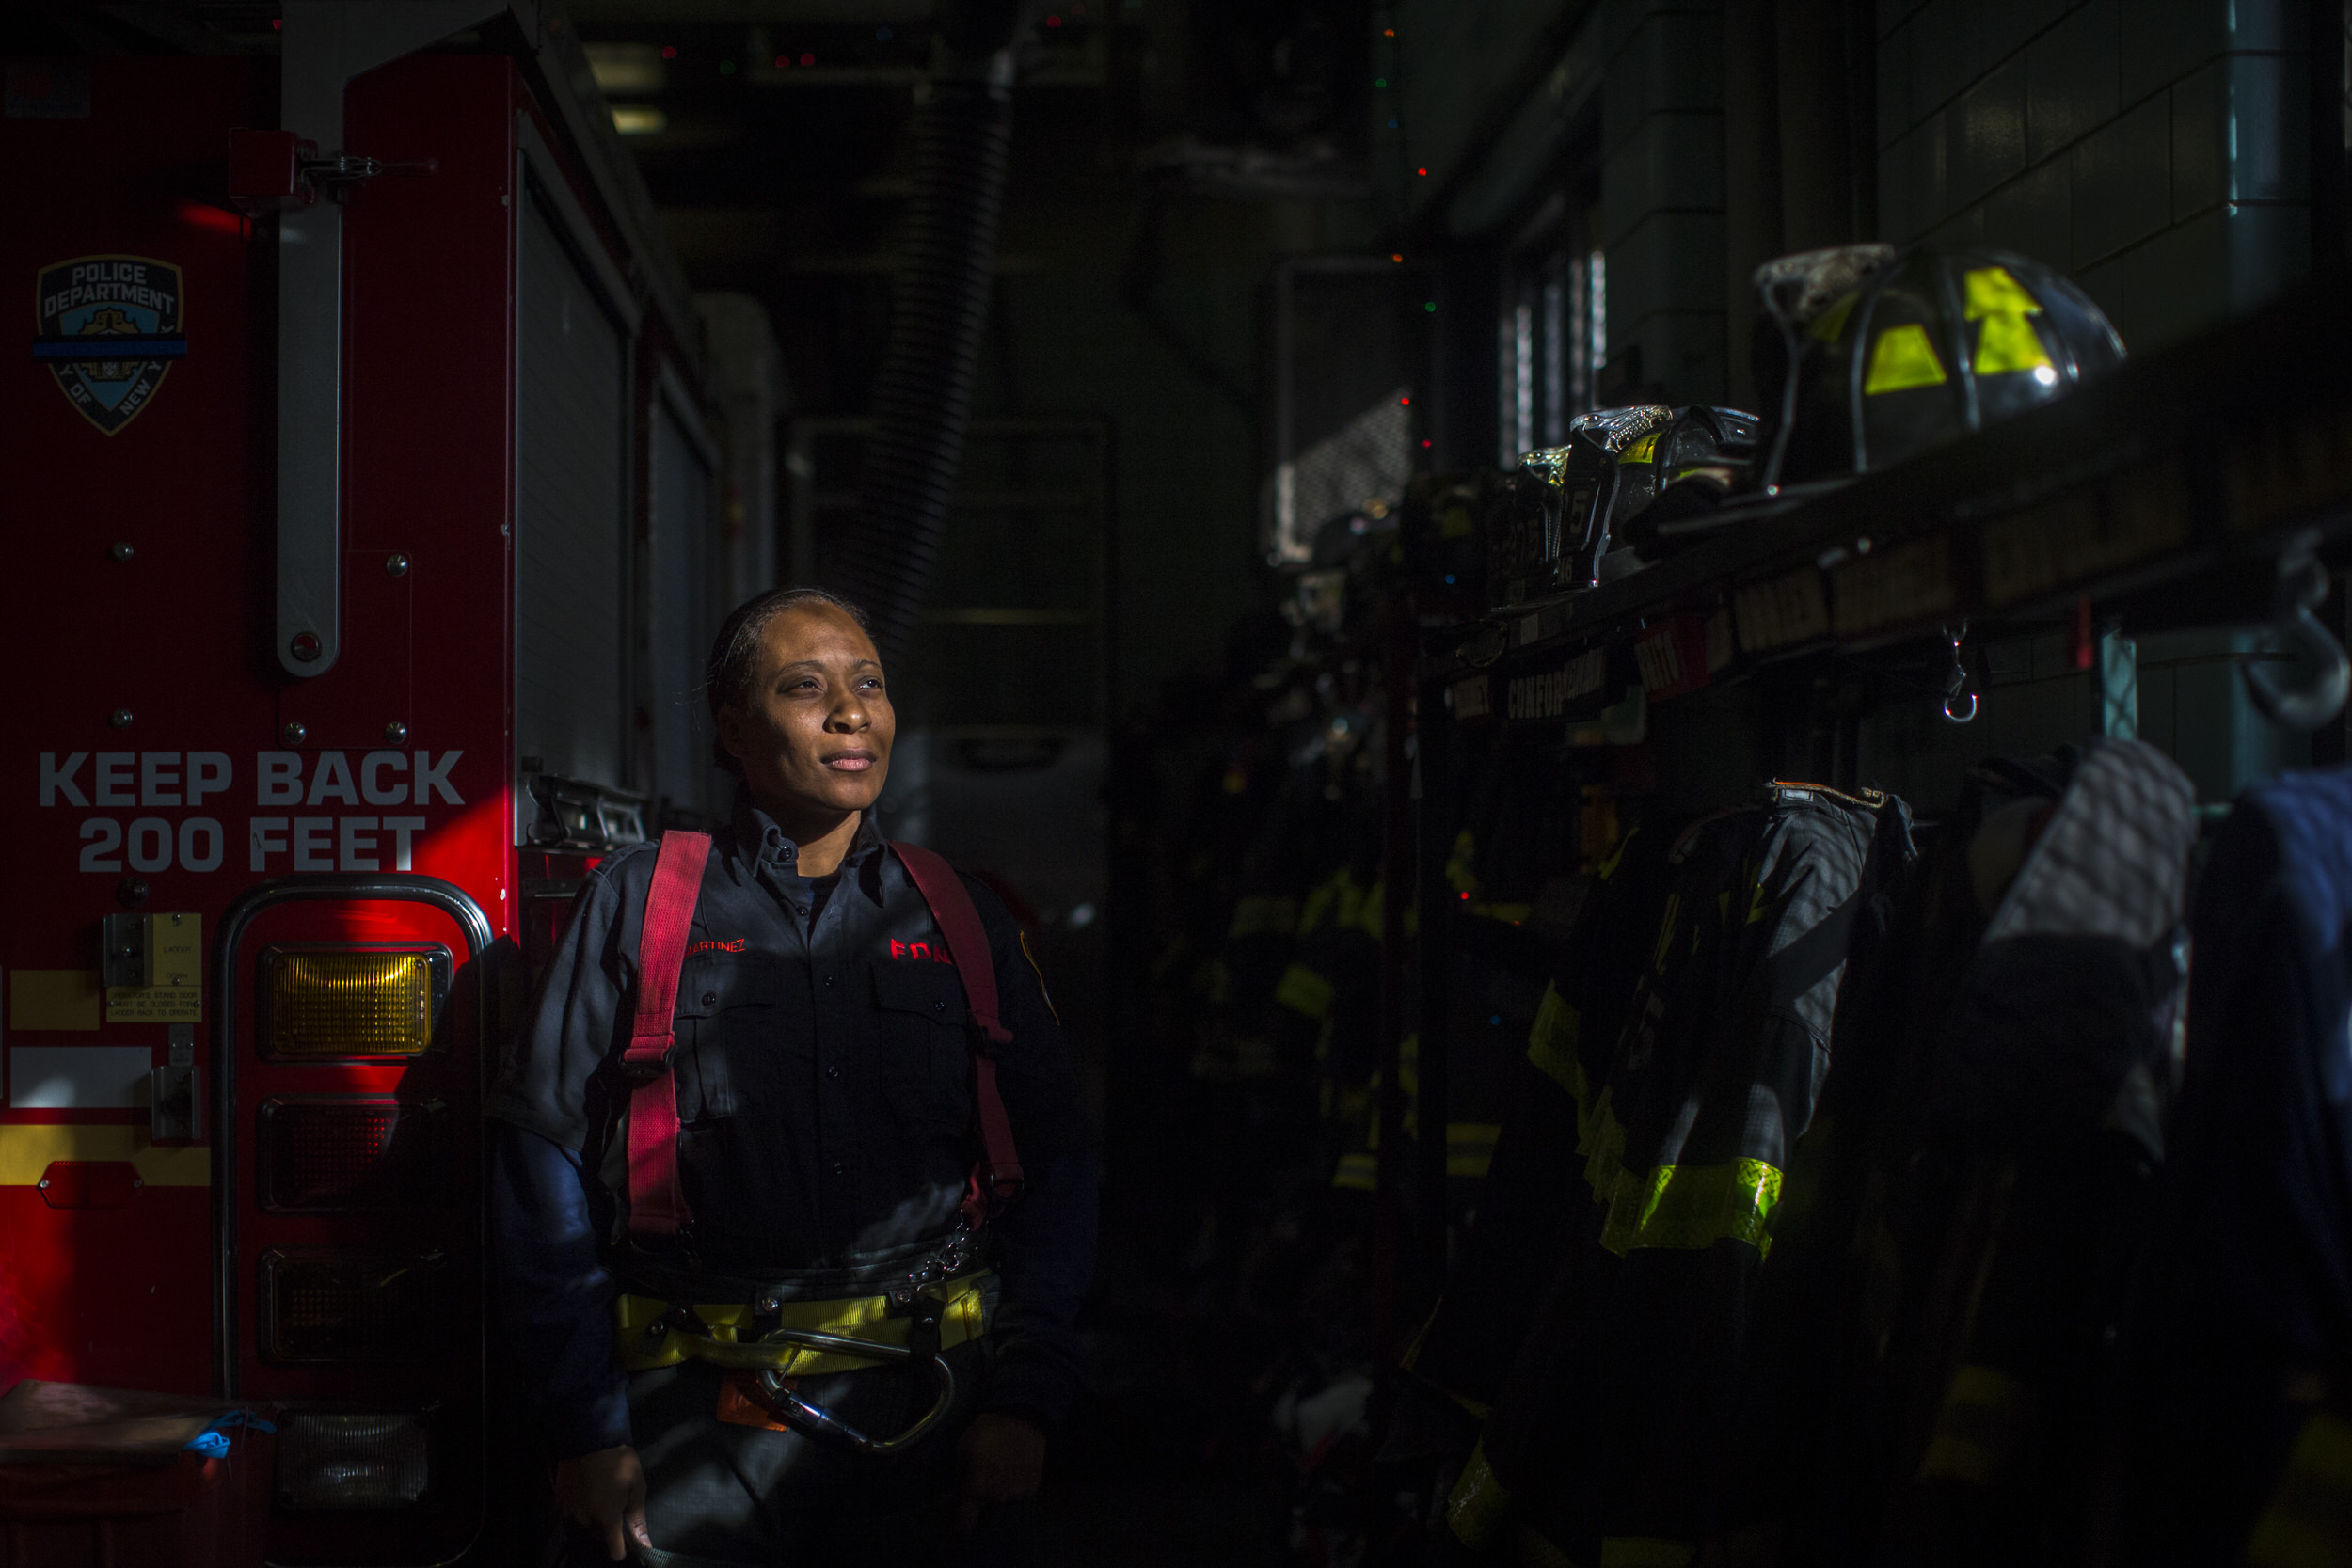  Firefighter Jackie-Michelle Martinez. Queens, NY 